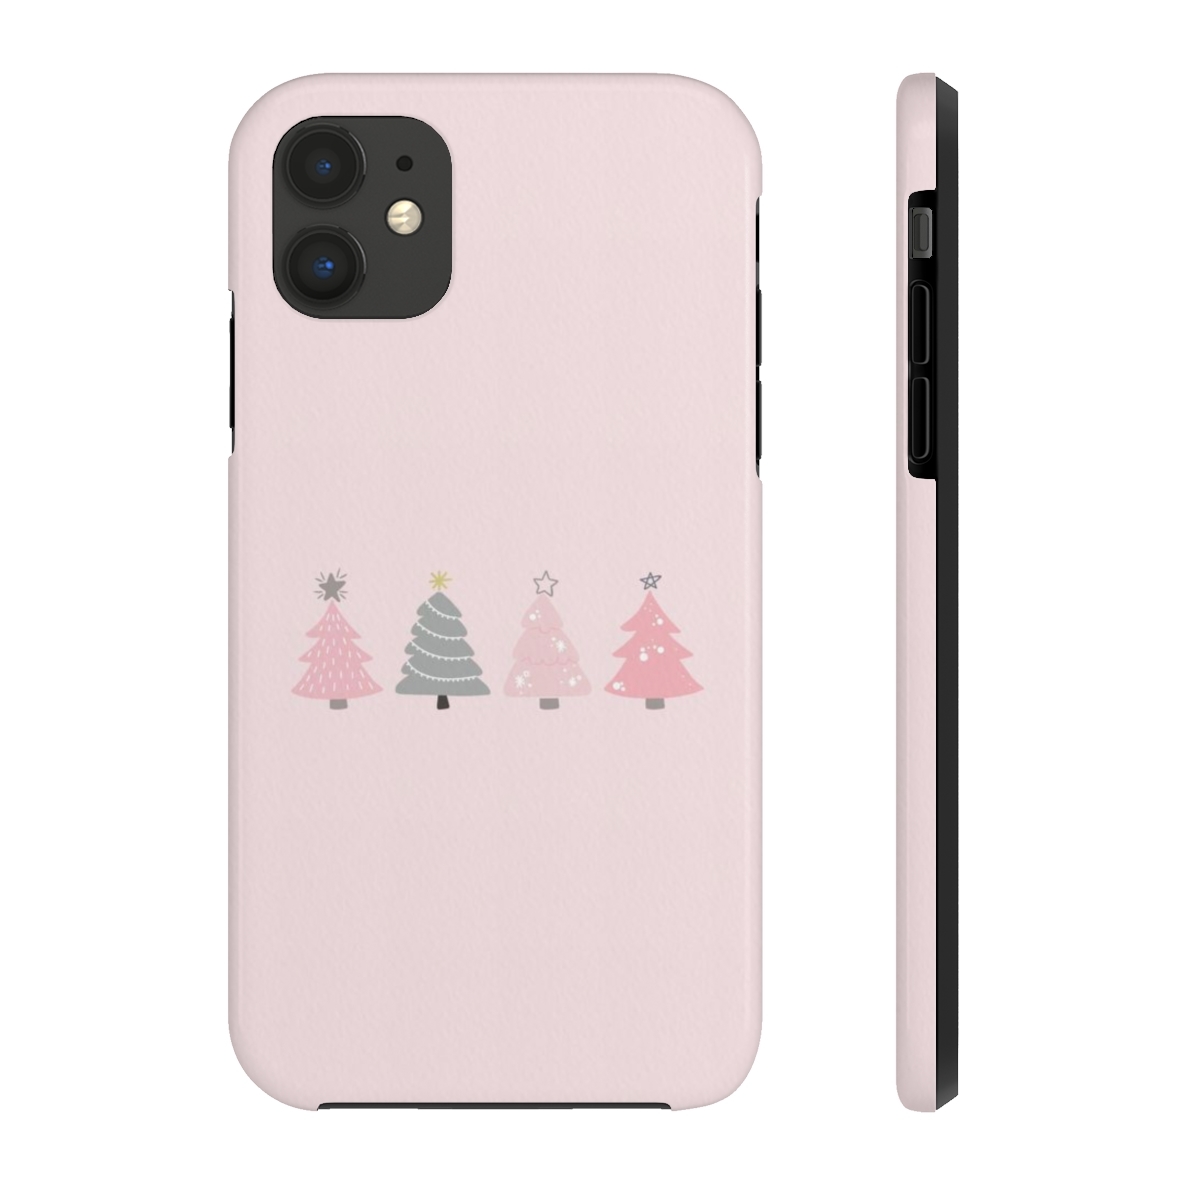 1Pcs - Winter 04 -Case Mate Tough For iPhone 6/7/8/X/11 Cases- 11 Variety#LM1 - $31.99